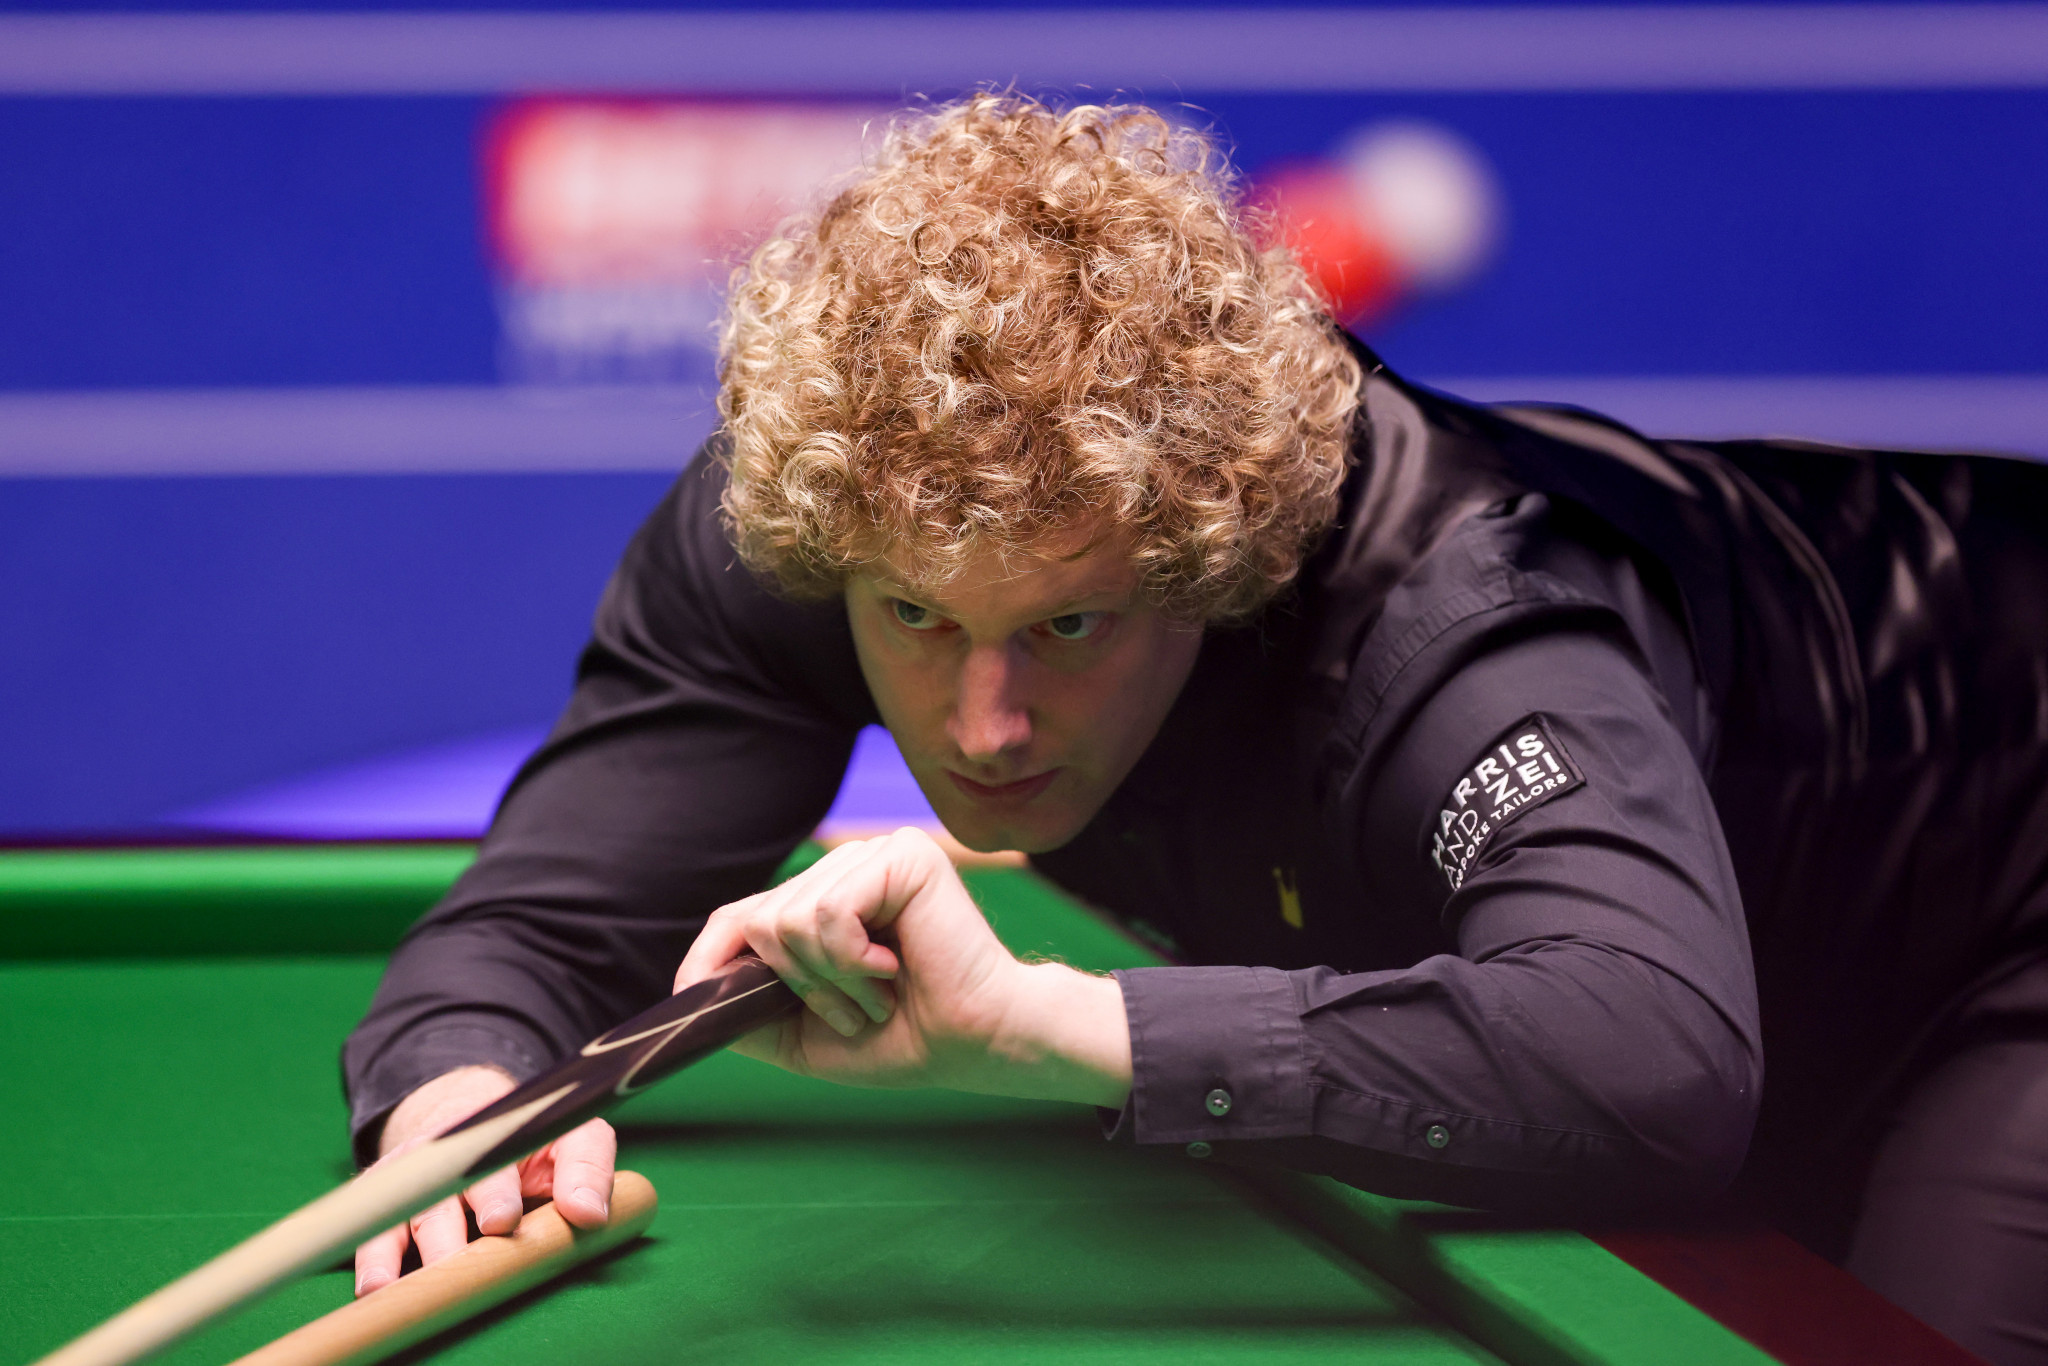 Australia's Neil Robertson leads England's Jack Lisowski 9-7 after two sessions of their World Snooker Championship second round match ©Getty Images